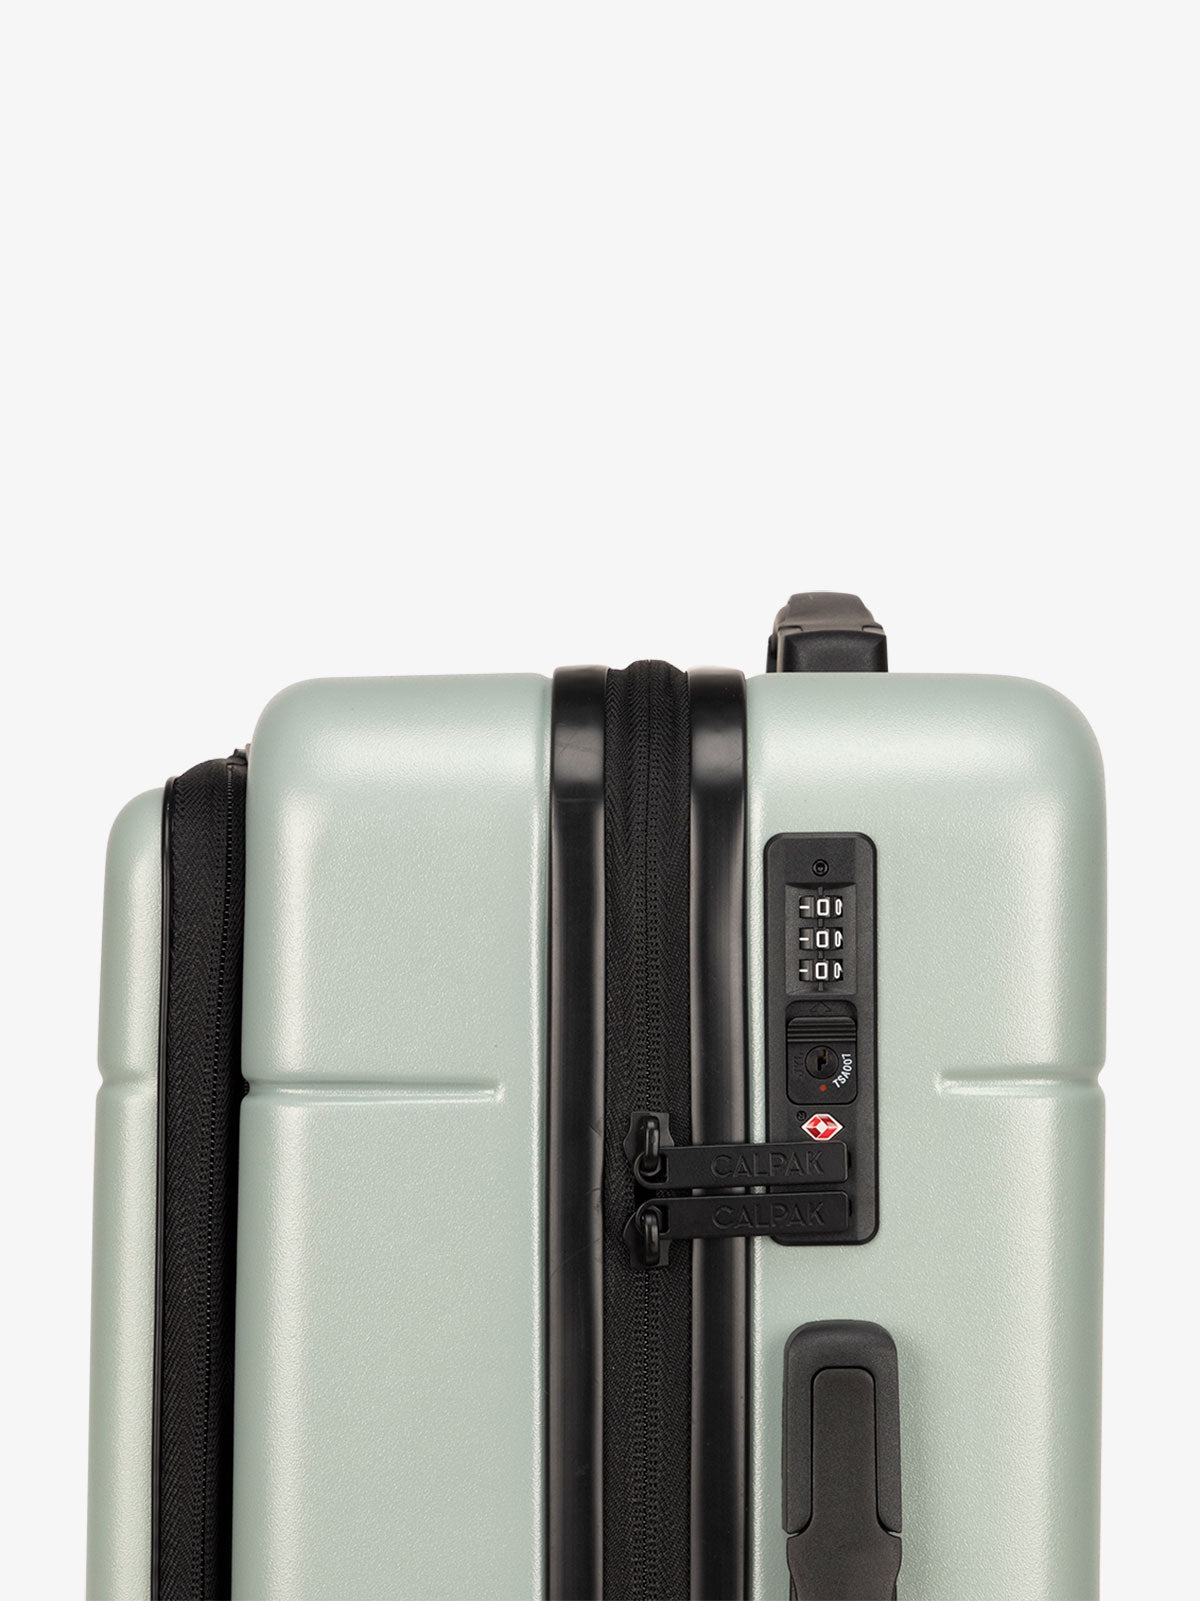 Hue carry on luggage with hardshell pocket and tsa approved lock